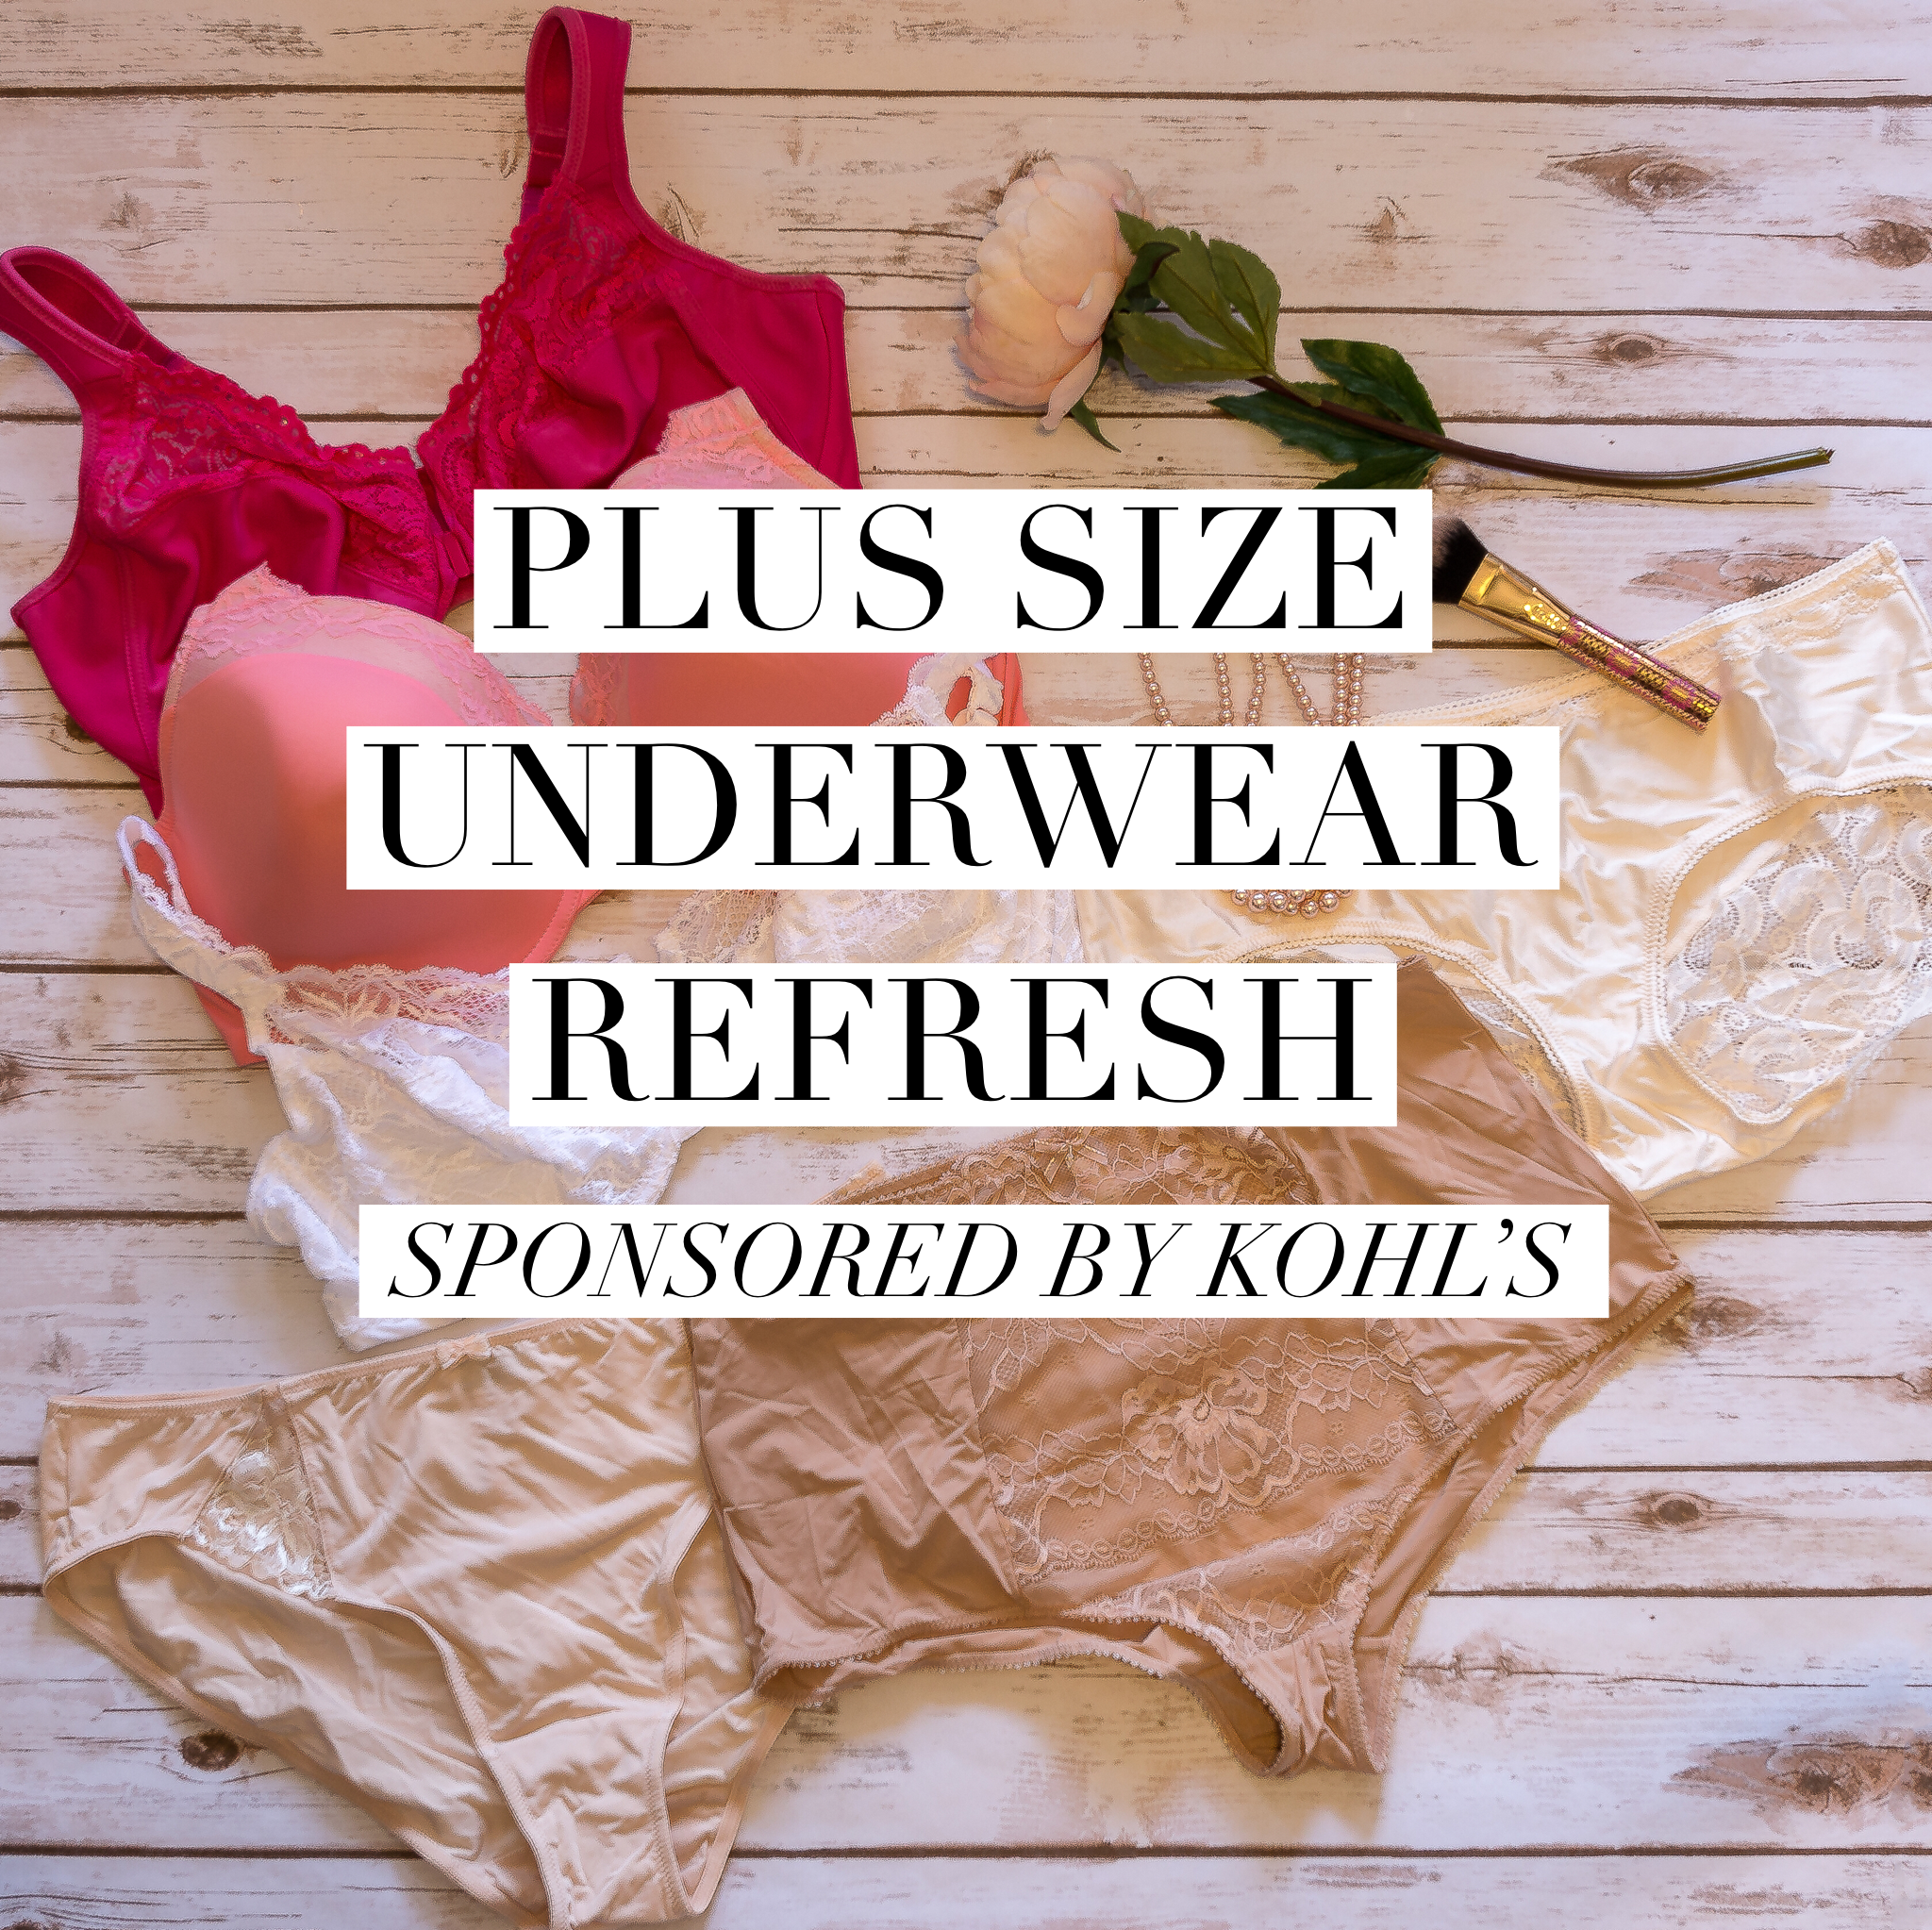 Top 5 Intimates Styles for Refreshing Your Top Drawer - Kohl's Blog